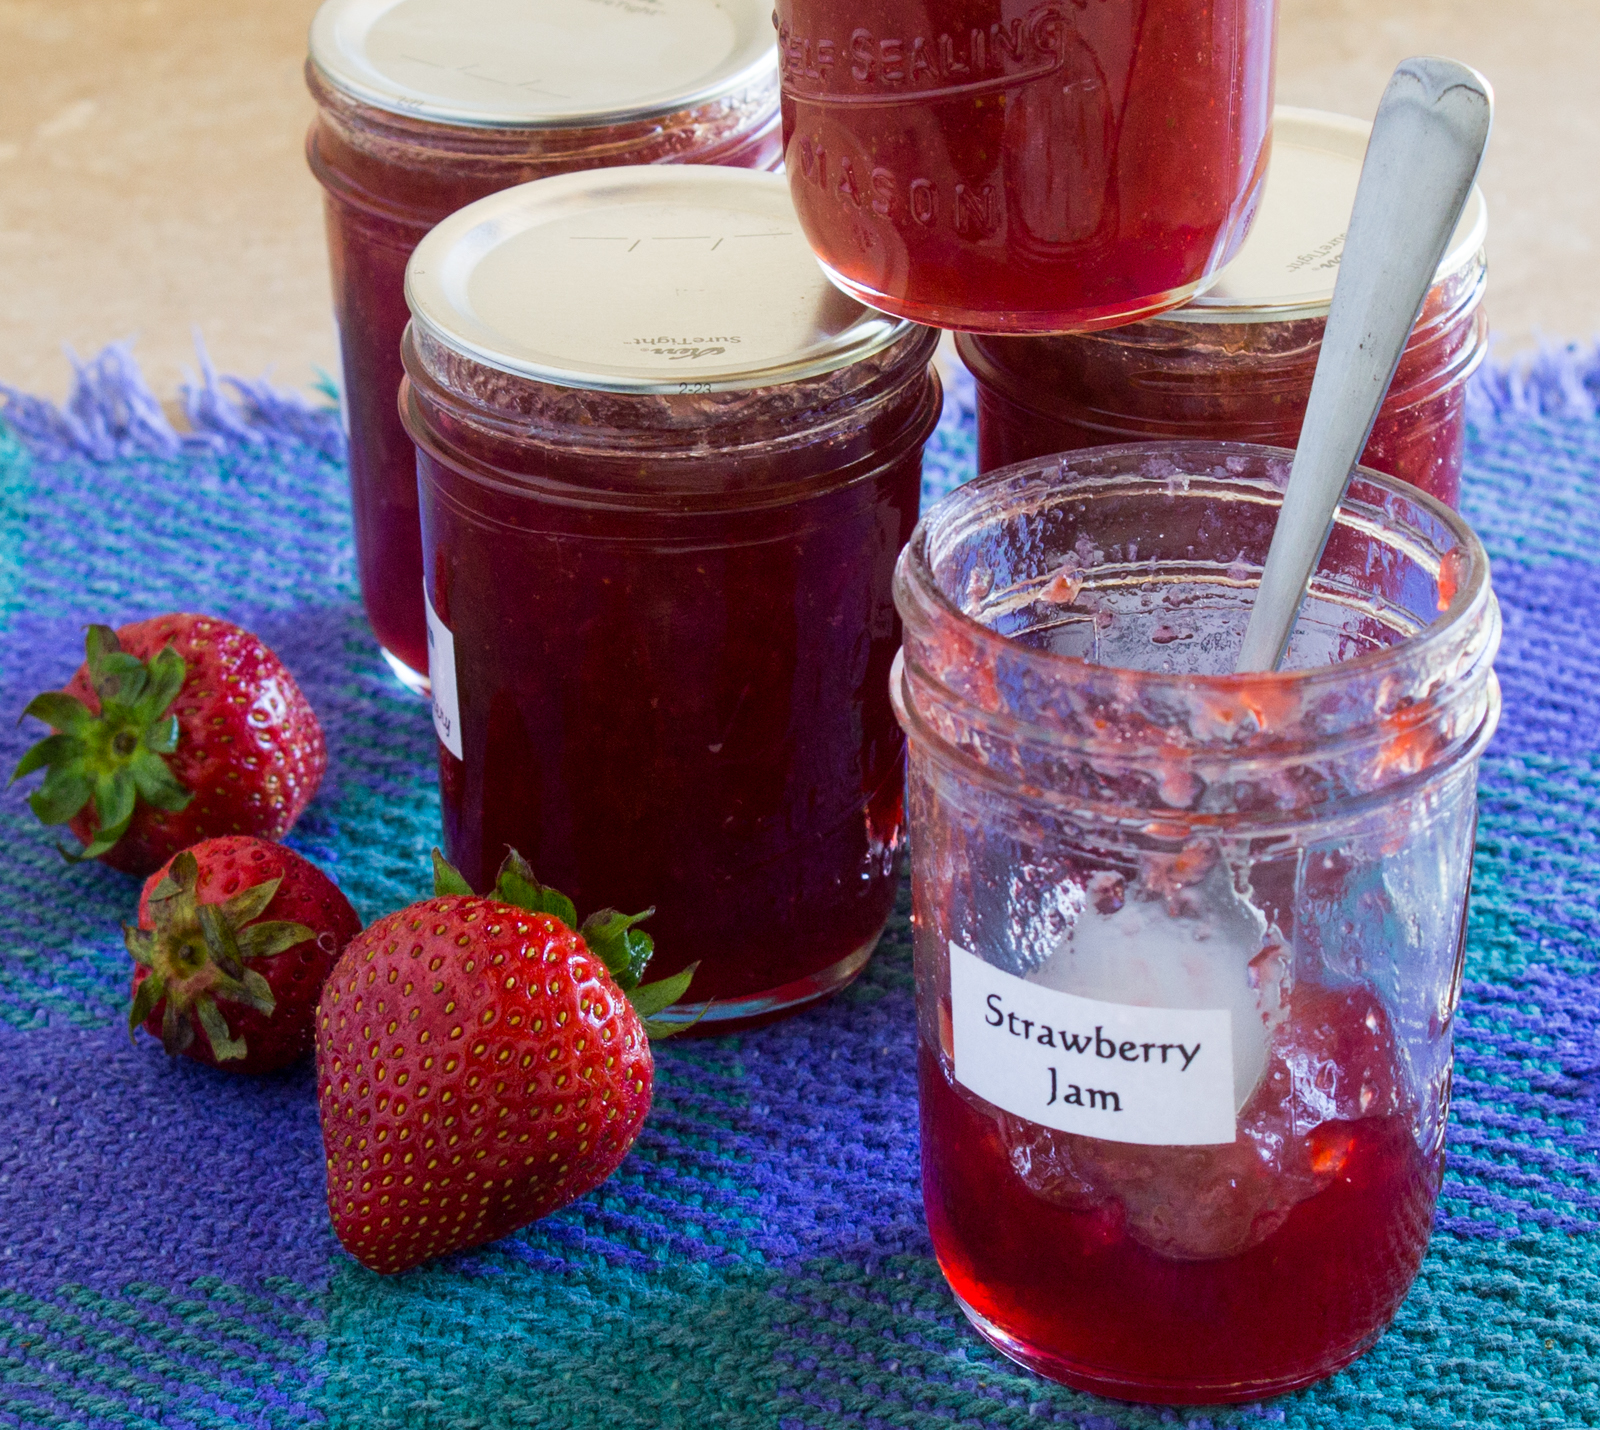 One open jar of strawberry jam with four jars of sealed jam.